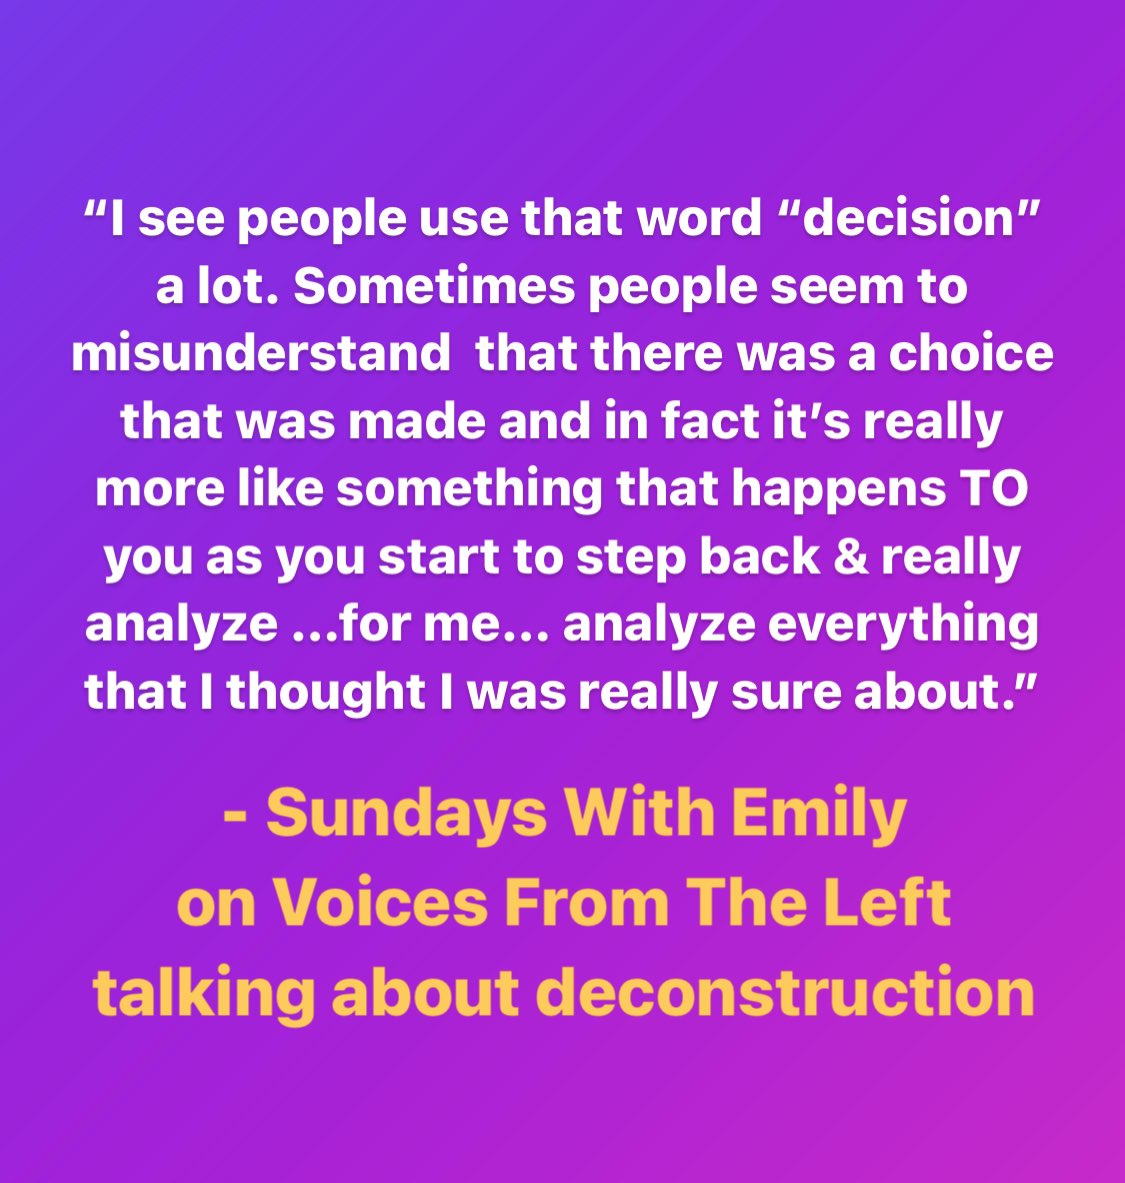 Catch the whole podcast here:

Apple- podcasts.apple.com/us/podcast/voi…

Spotify- spotify.link/pOEPrUxAHDb
 
#deconstruction #deconstructingfaith #growthmindset #agnostic #atheism #criticalthinking #churchdropout #churchtoo #identitycrisis #leftwing #democrats #liberal #progressivepolitics